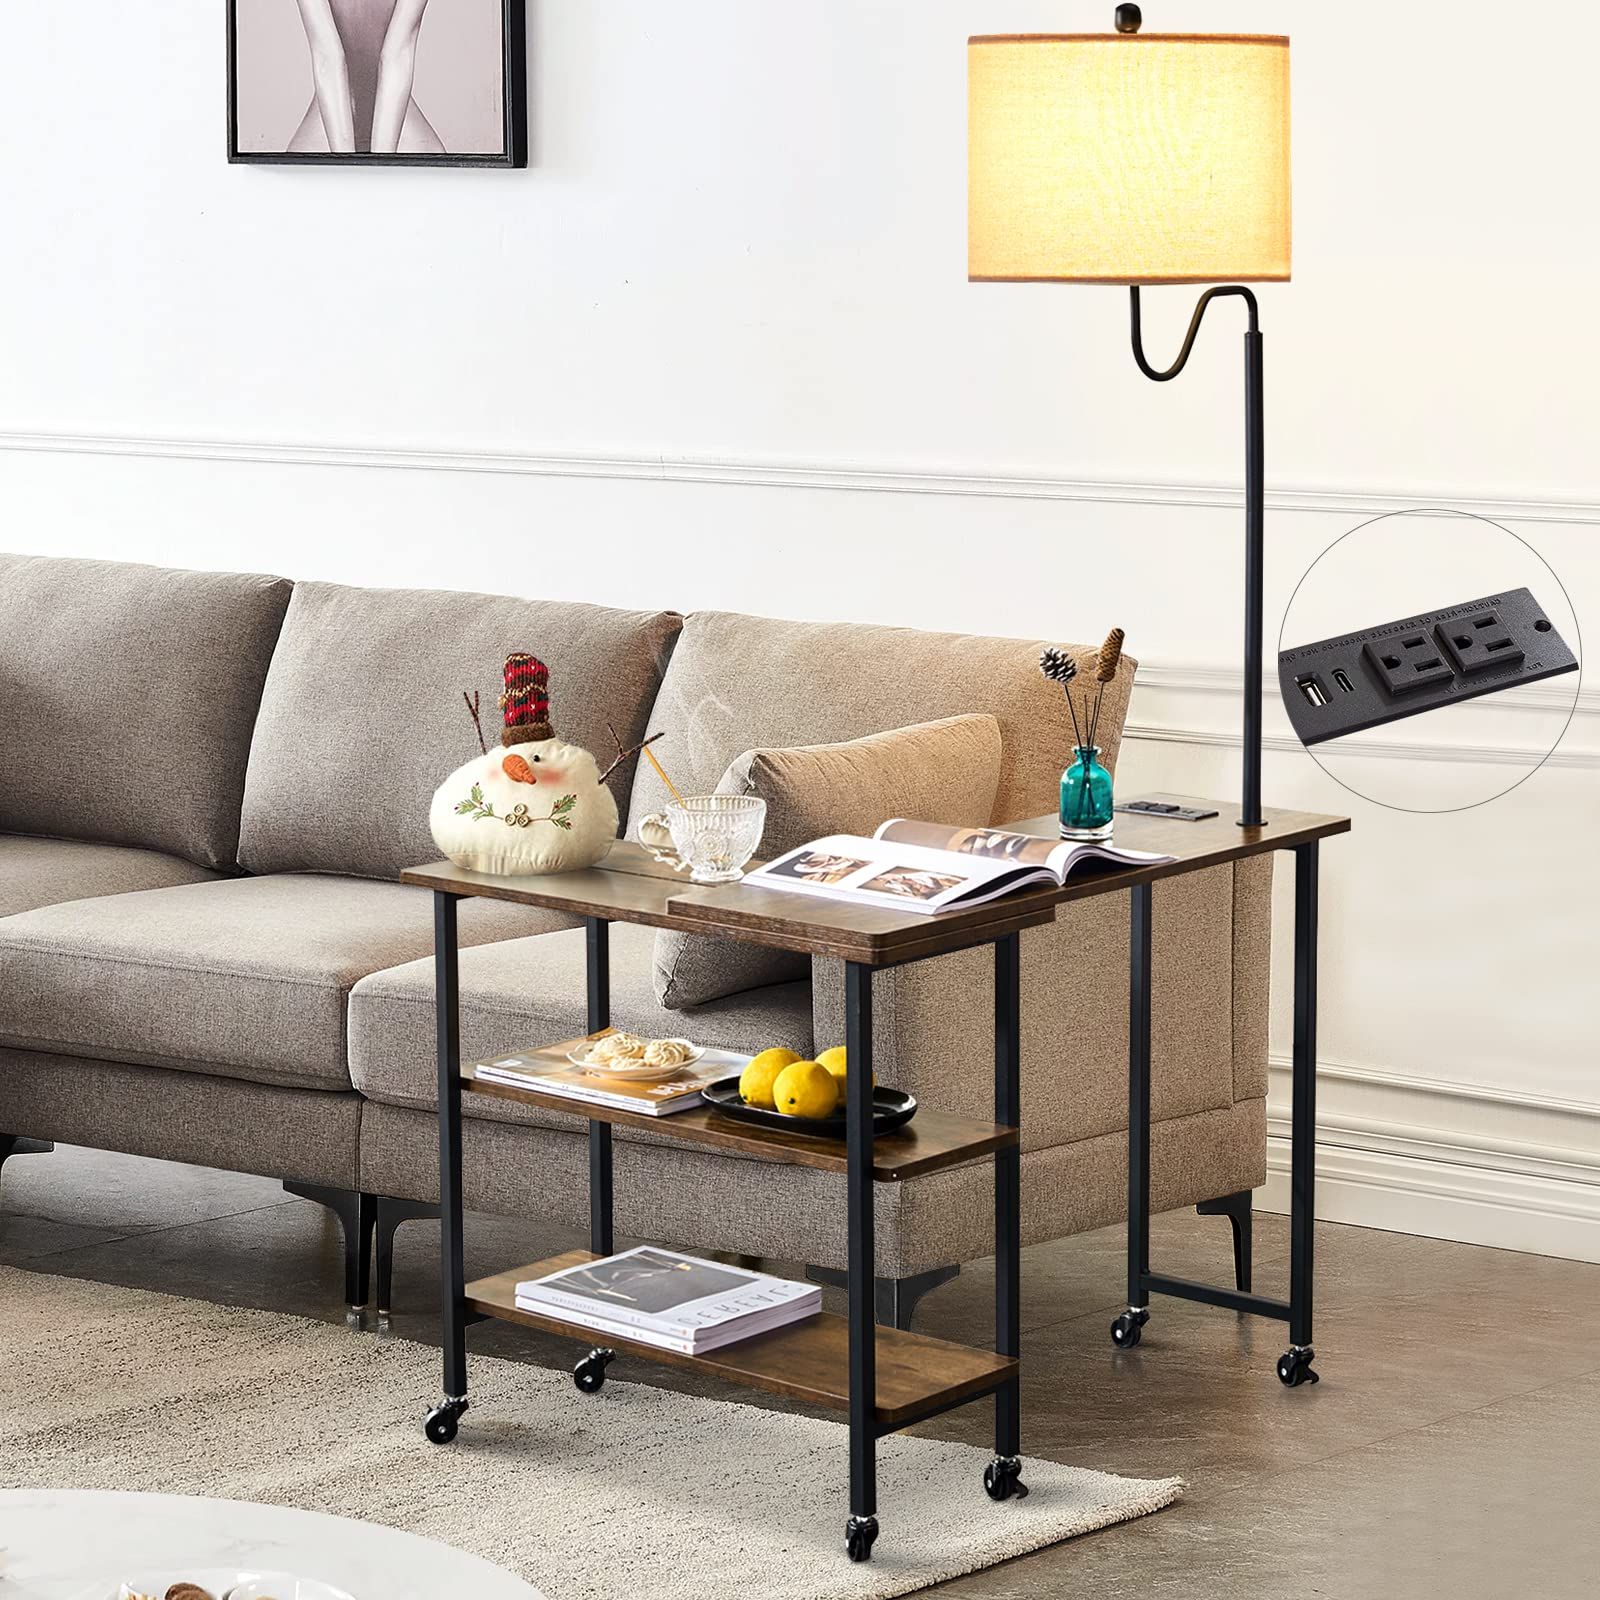 Most Recent Amazon: Lokhom Floor Lamp With Table, 360°rotatable Sofa Side Table  With Lamp,  (View 5 of 10)